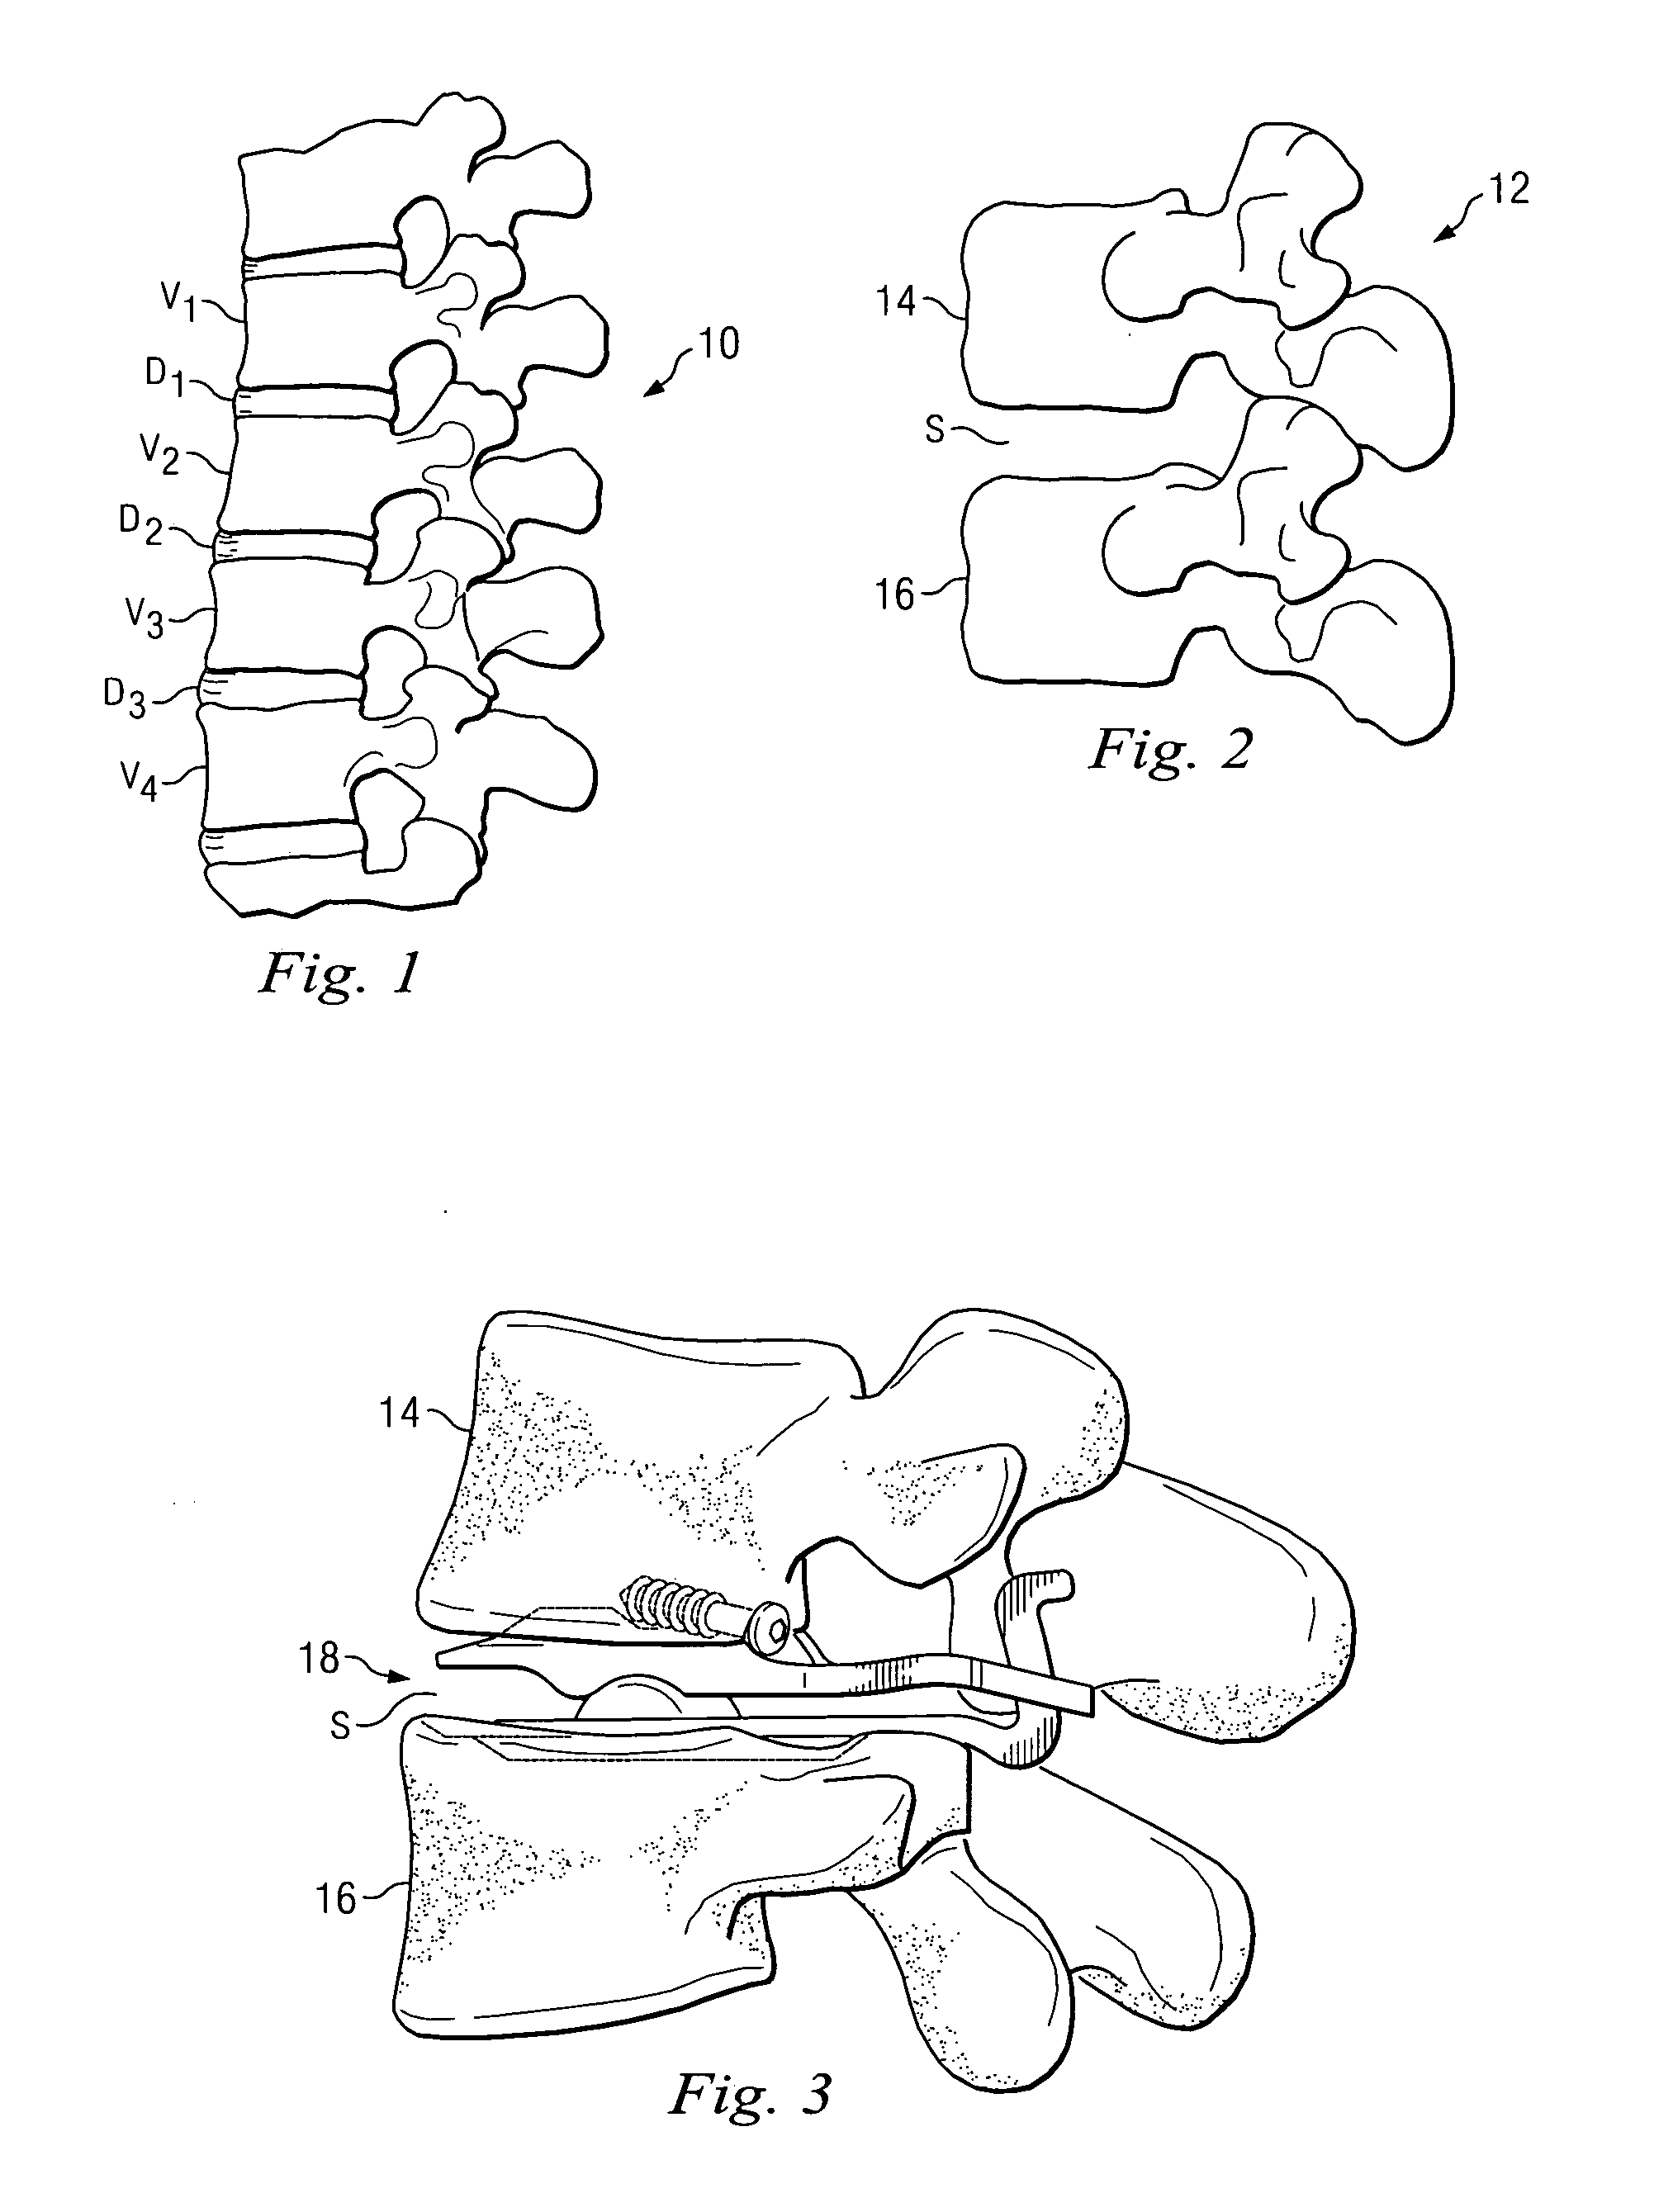 Posterior joint replacement device